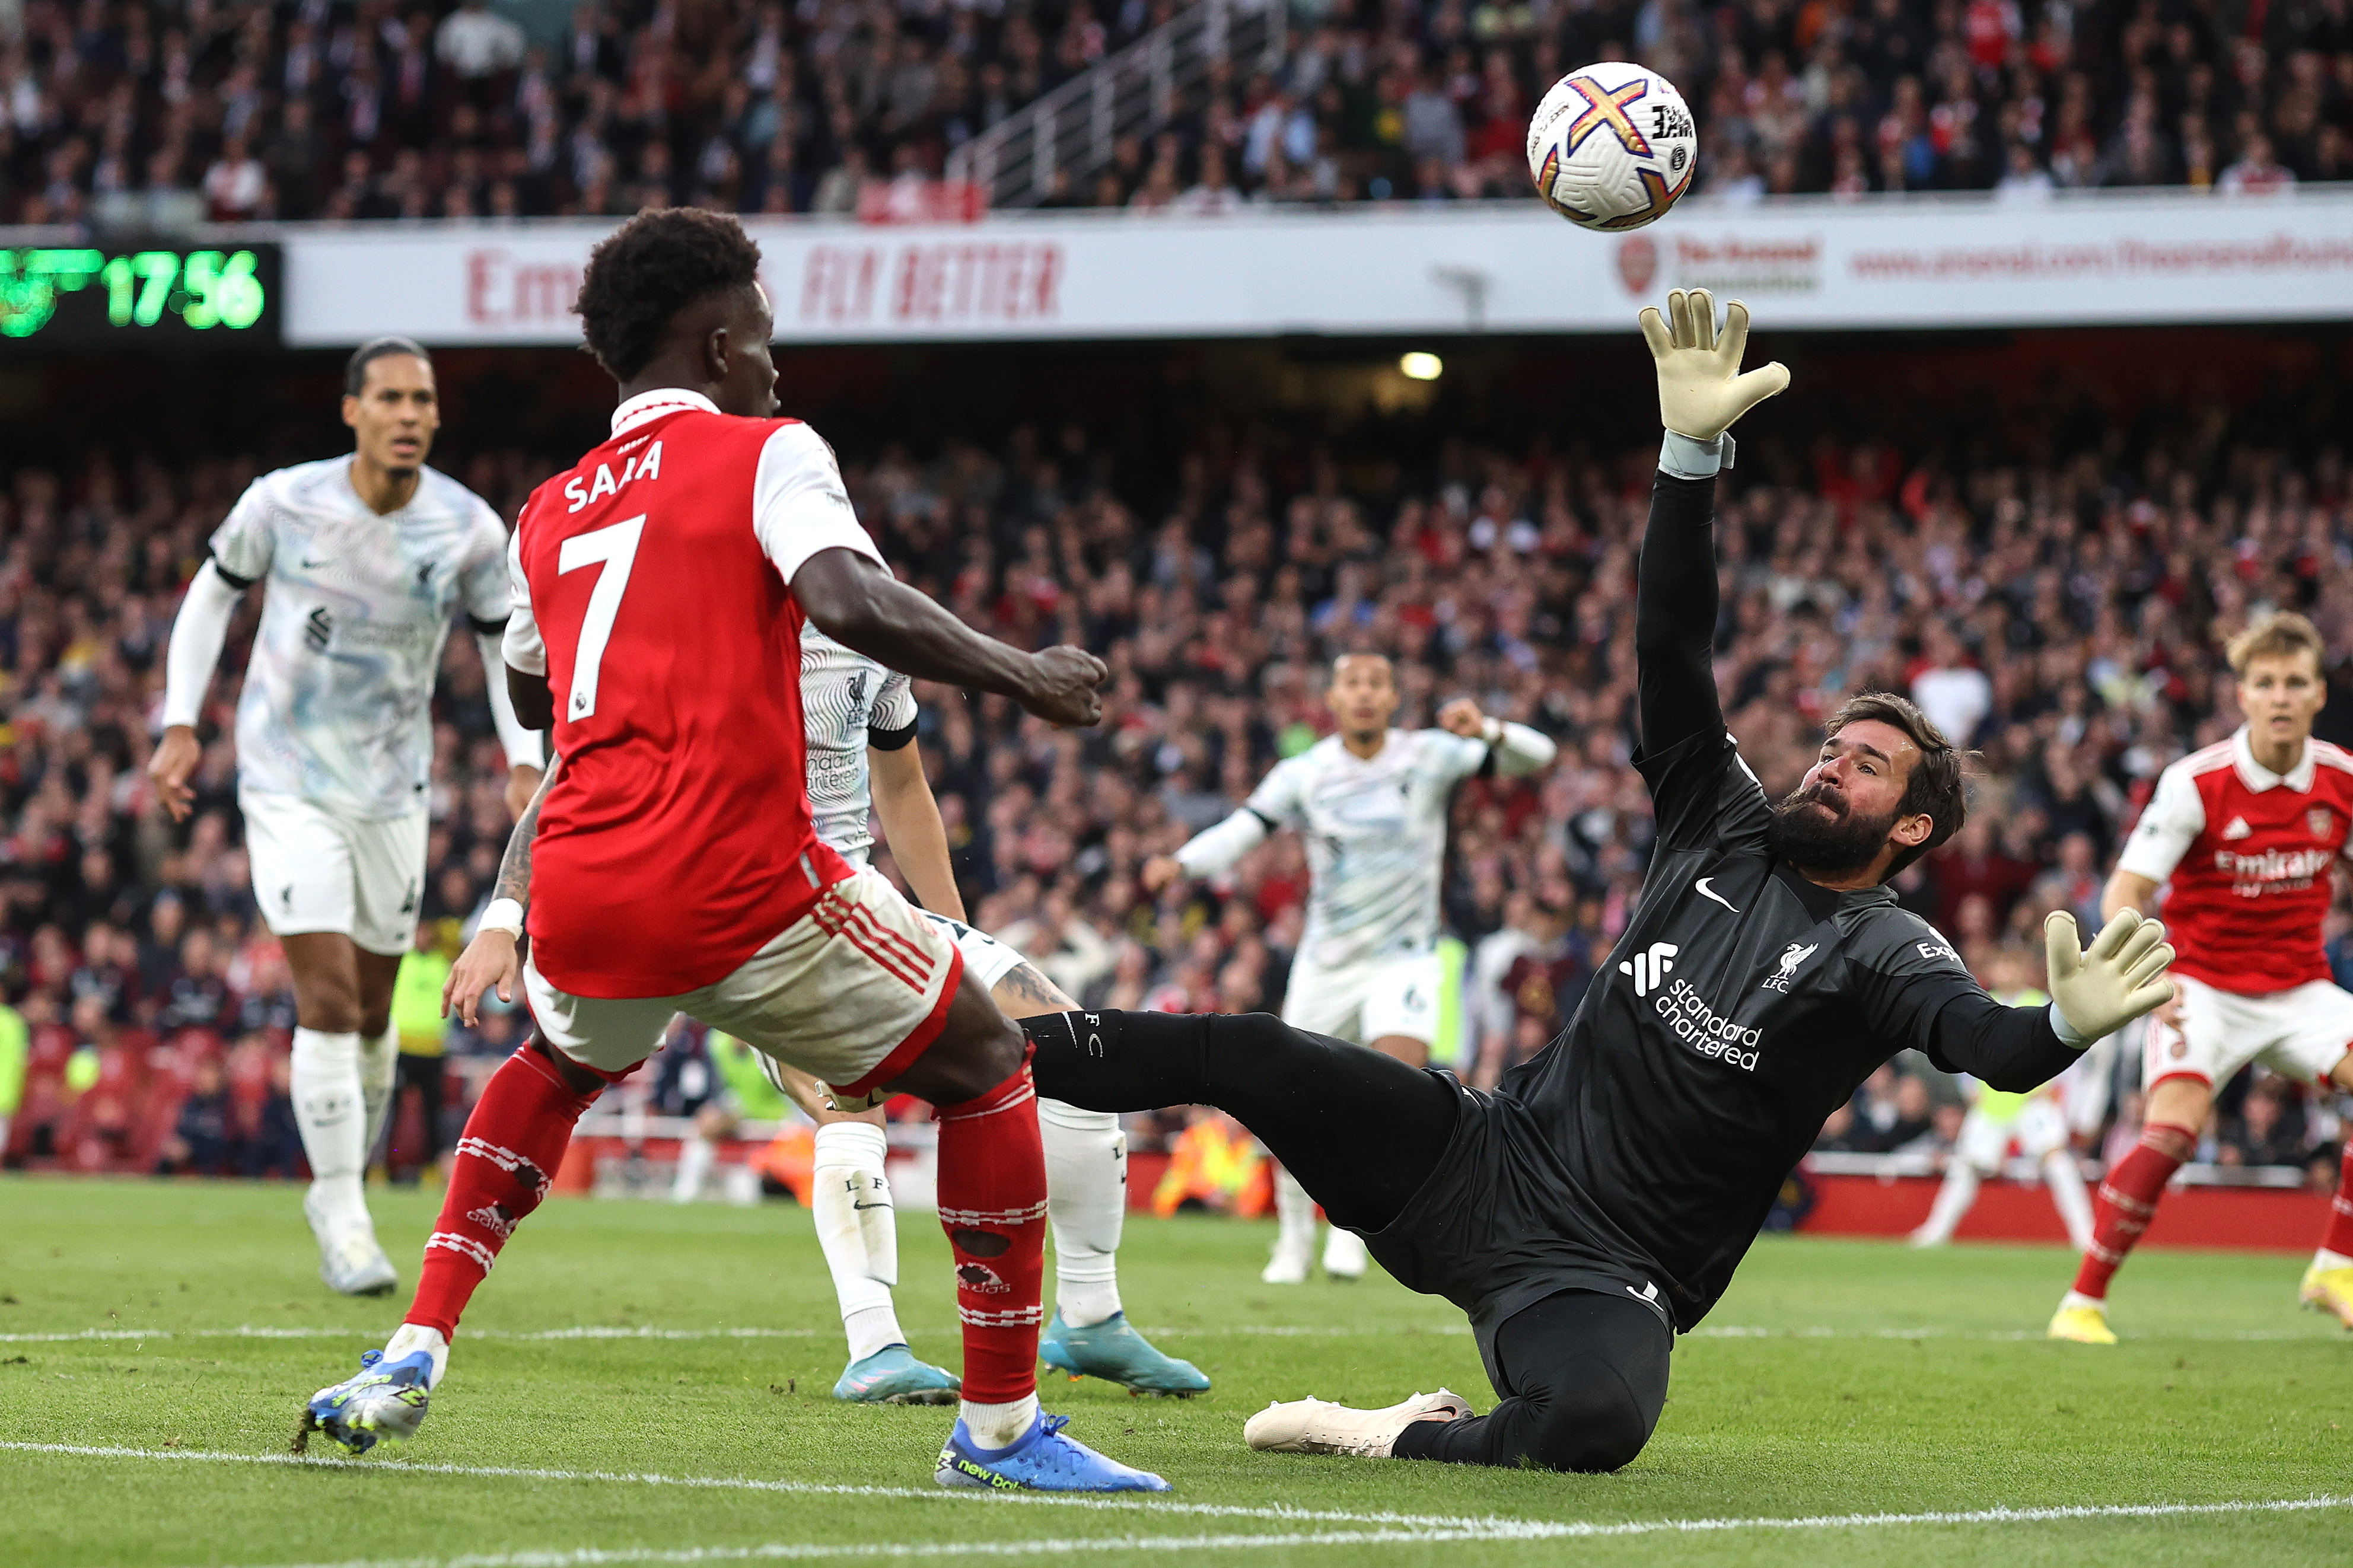 Liverpool vs Arsenal LIVE Premier League updates and live scoring commentary stream